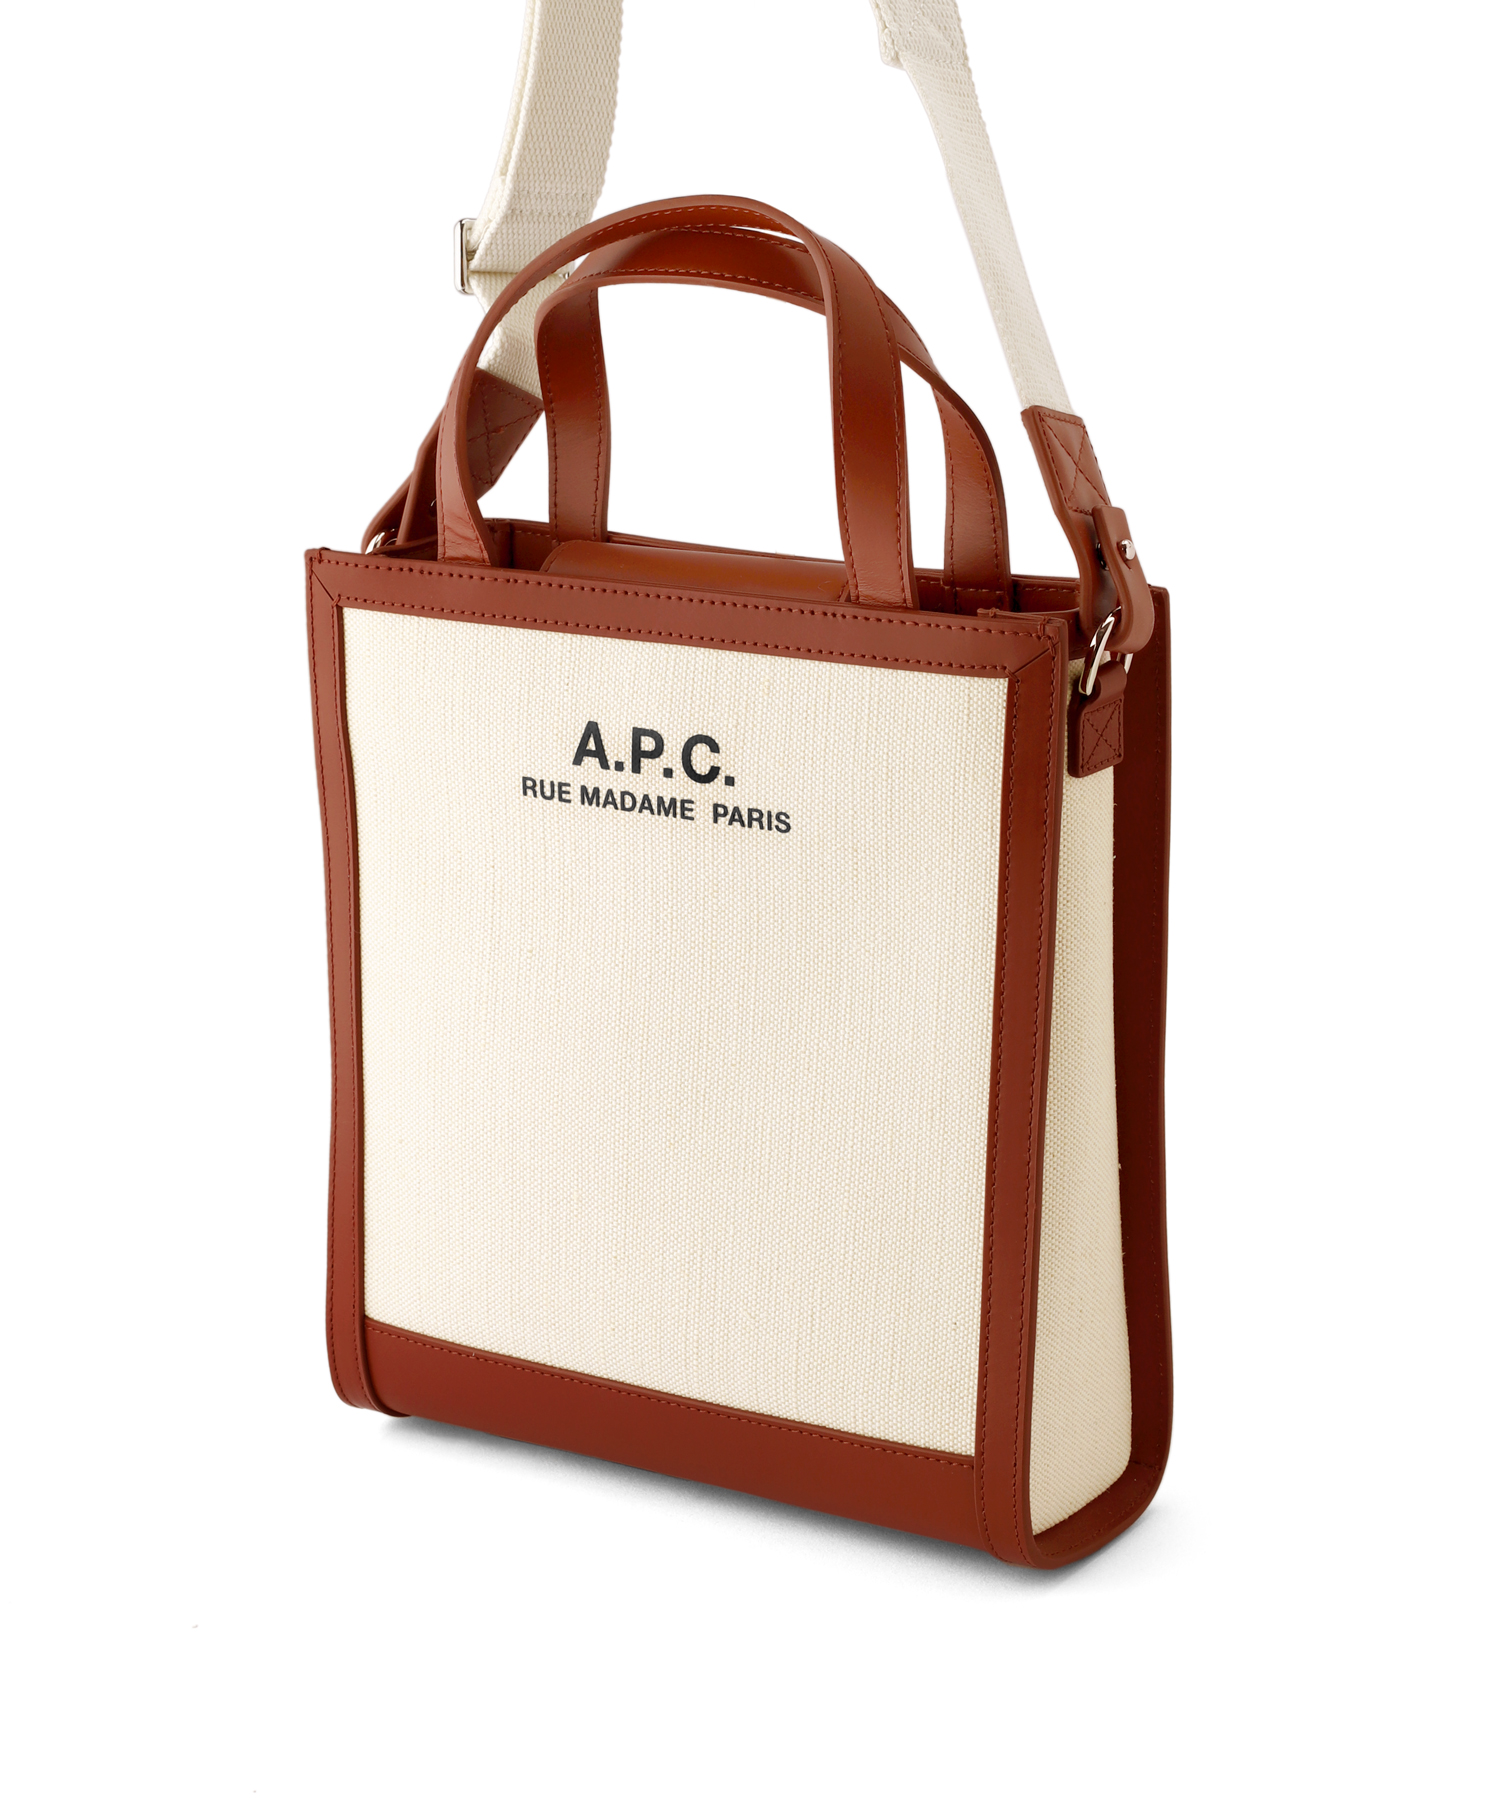 【A.P.C.】TOTE CAMILLE SMALL[ショルダーバッグ]